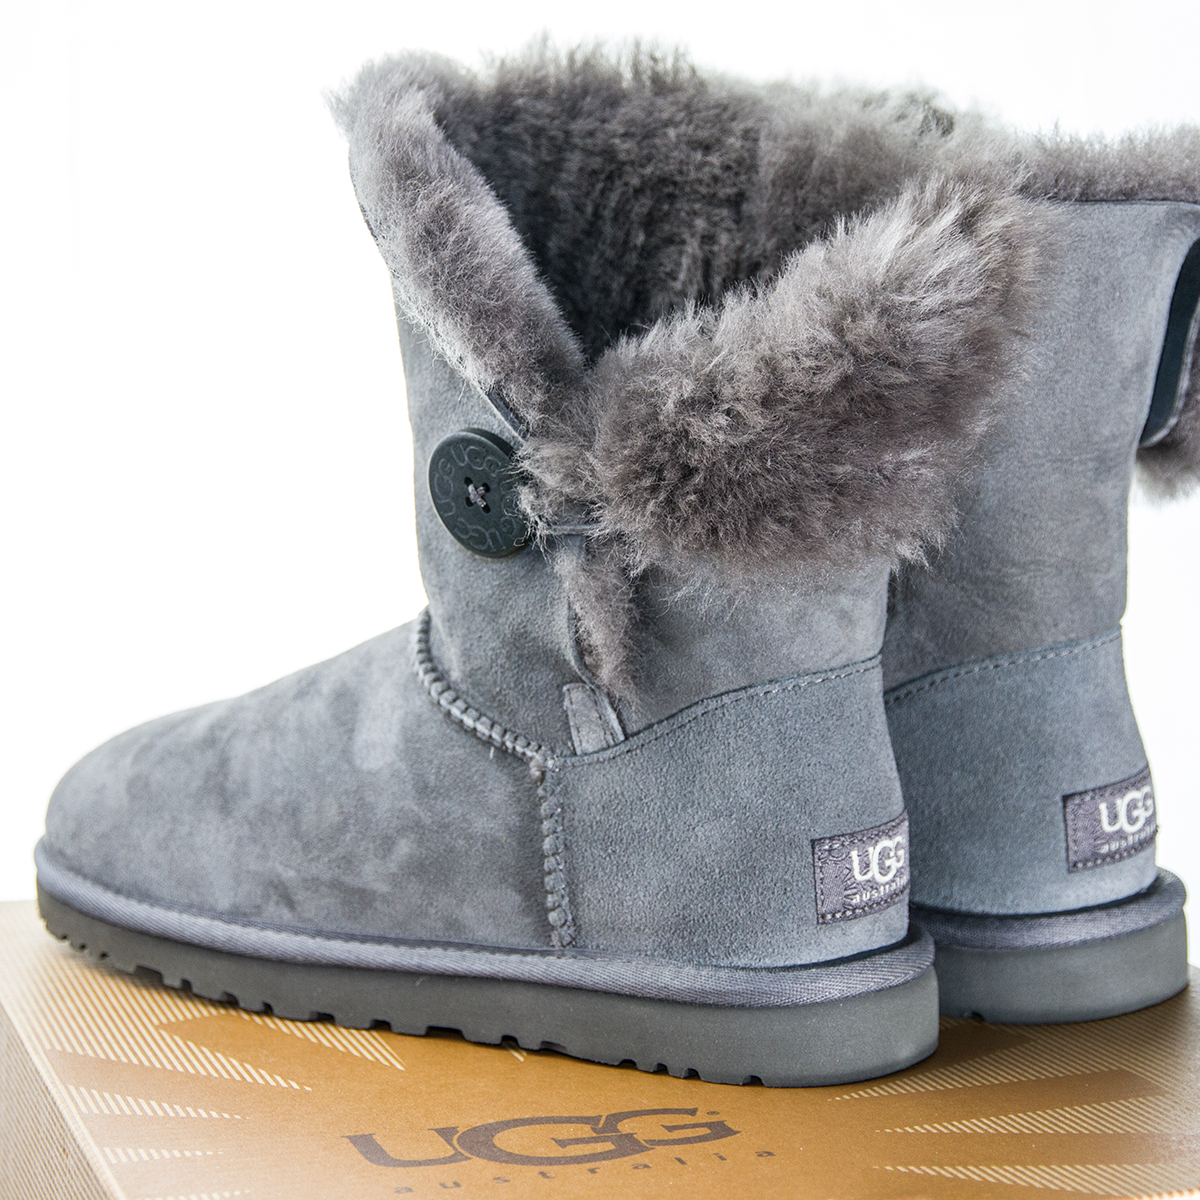 It’s UGGS-Time..